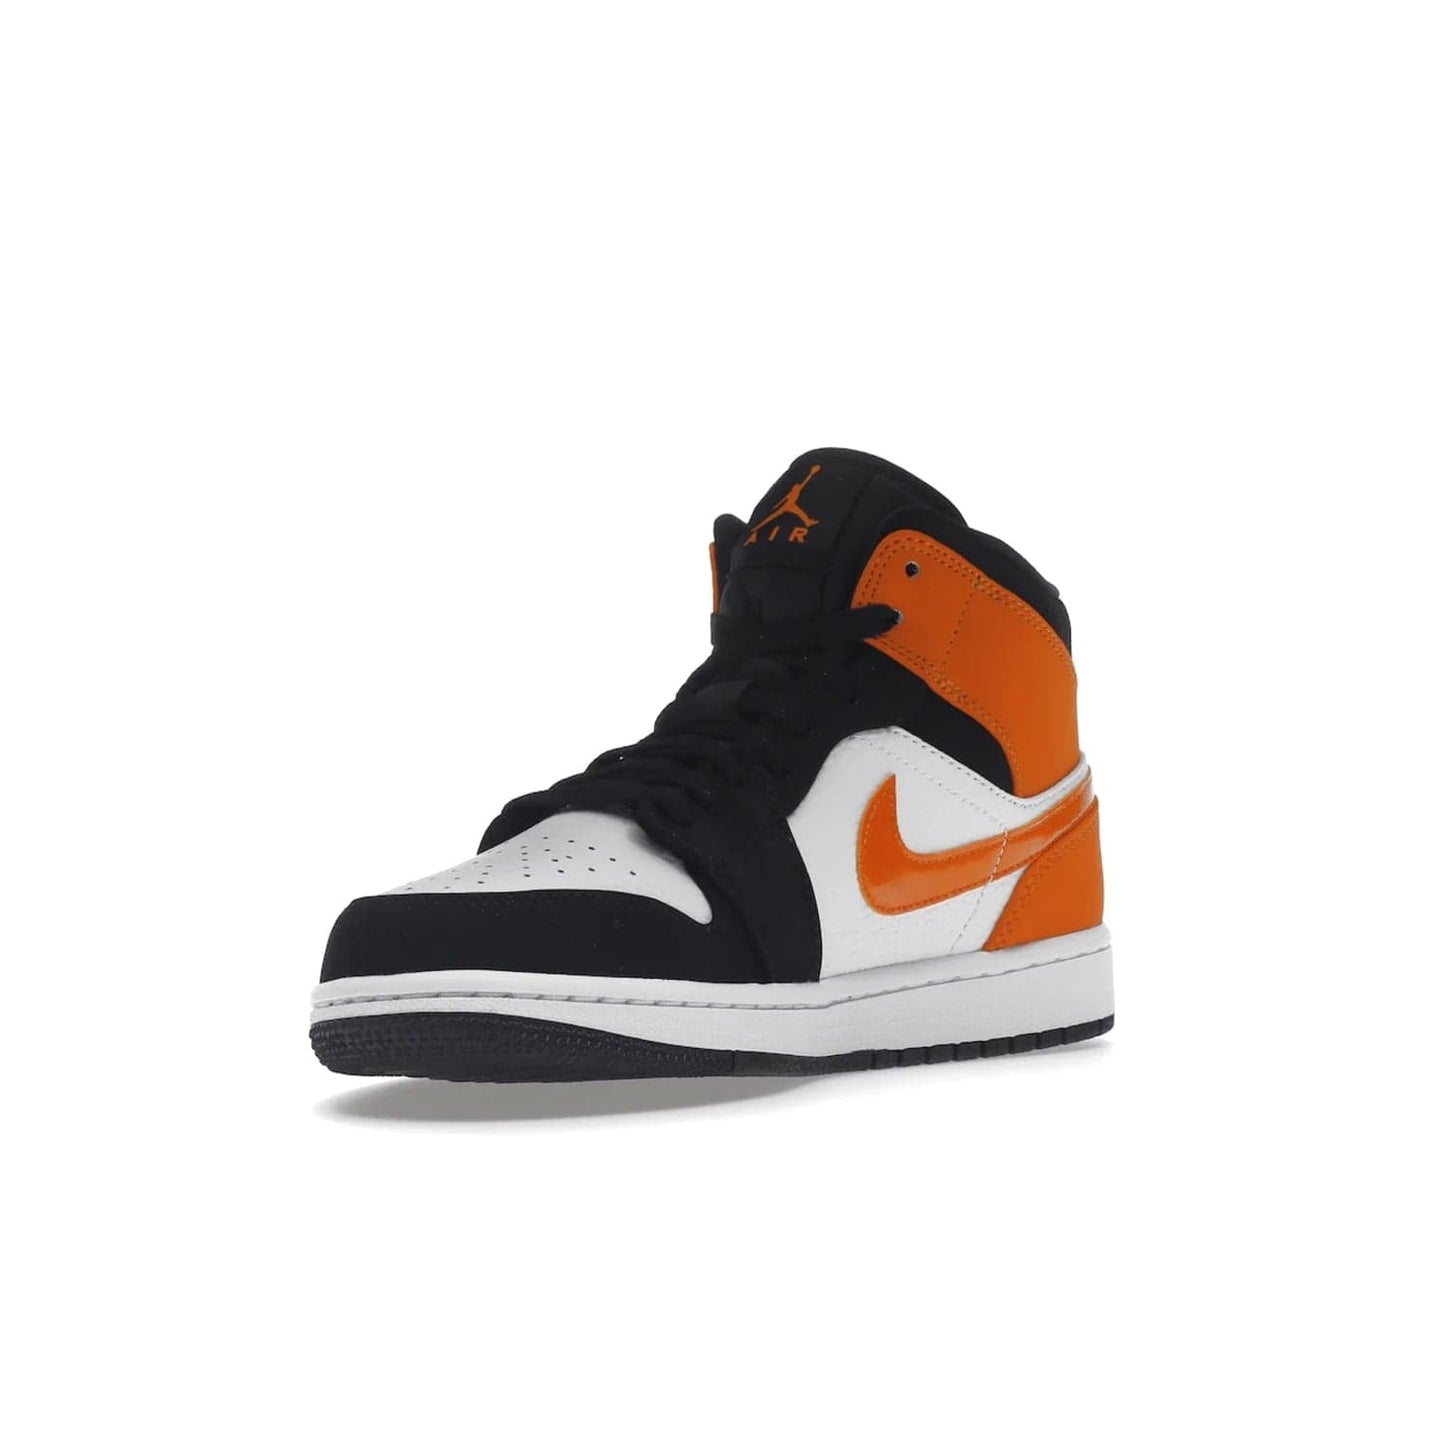 Jordan 1 Mid Shattered Backboard - Image 14 - Only at www.BallersClubKickz.com - The Air Jordan 1 Mid Shattered Backboard offers a timeless Black/White-Starfish colorway. Classic Swoosh logo and AJ insignia plus a shatterd backboard graphic on the insole. Get your pair today!